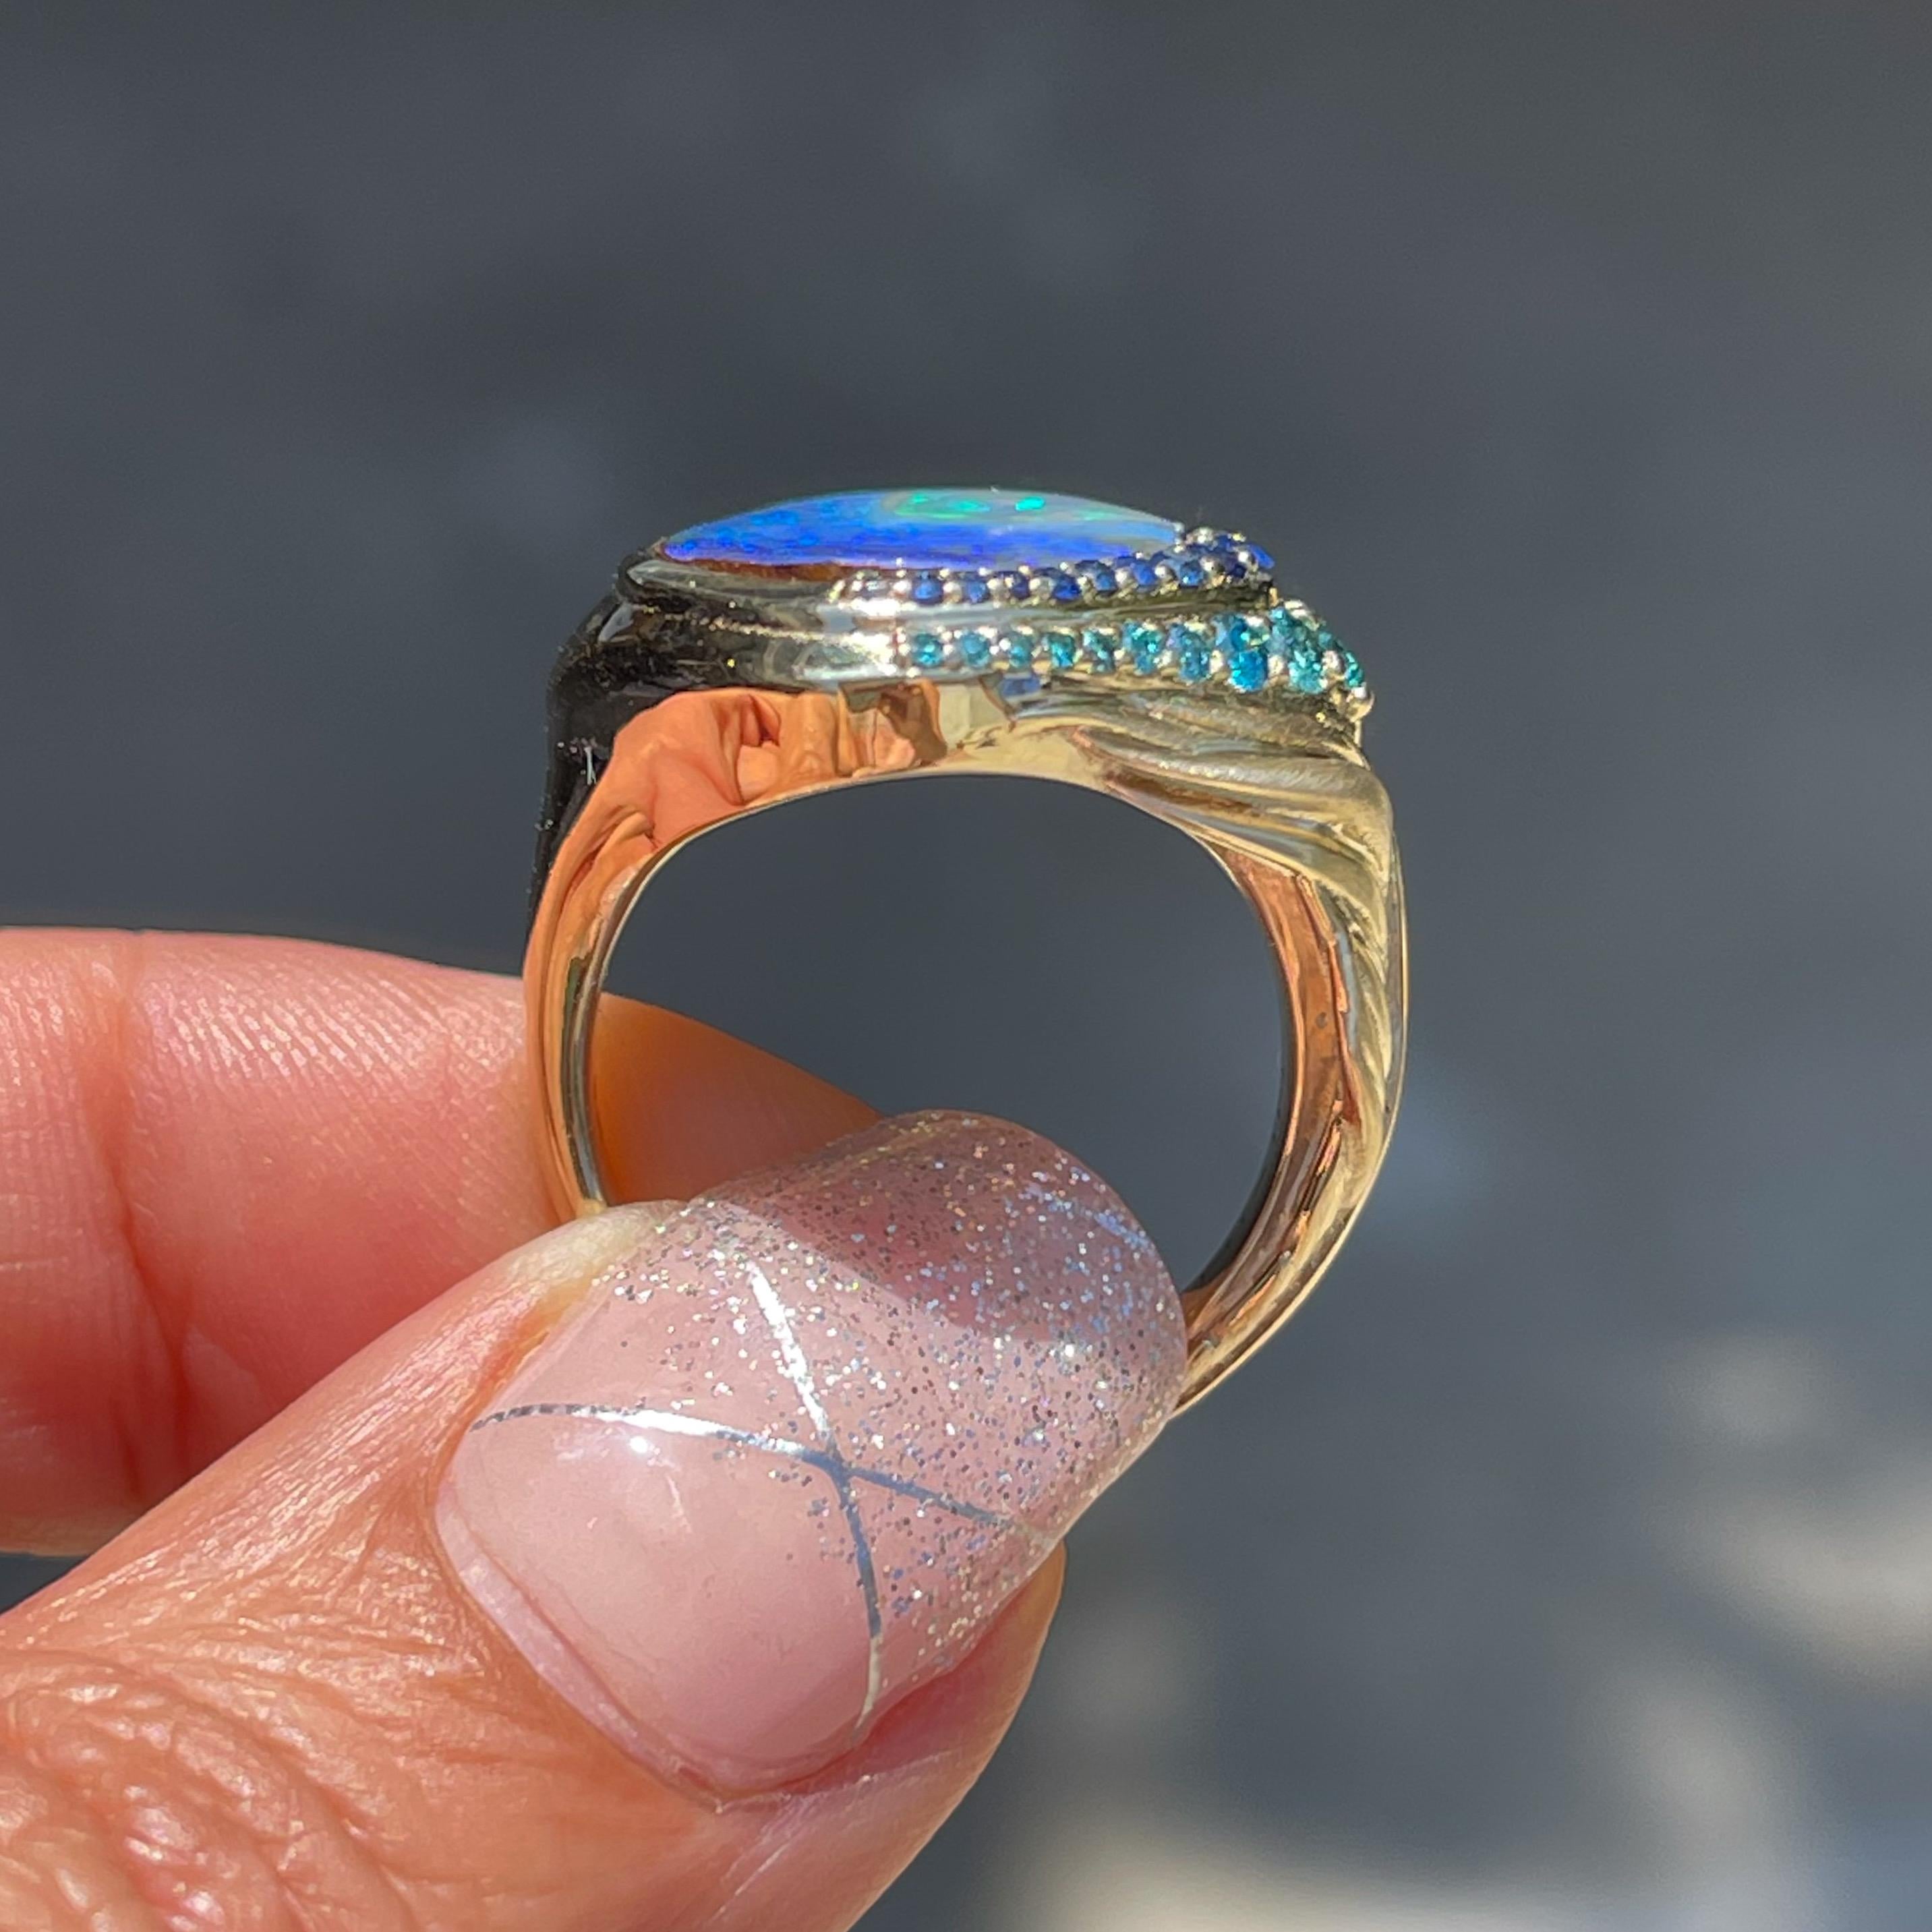 Plume Australian Opal Ring in Gold with Sapphires and Diamonds by NIXIN Jewelry For Sale 5